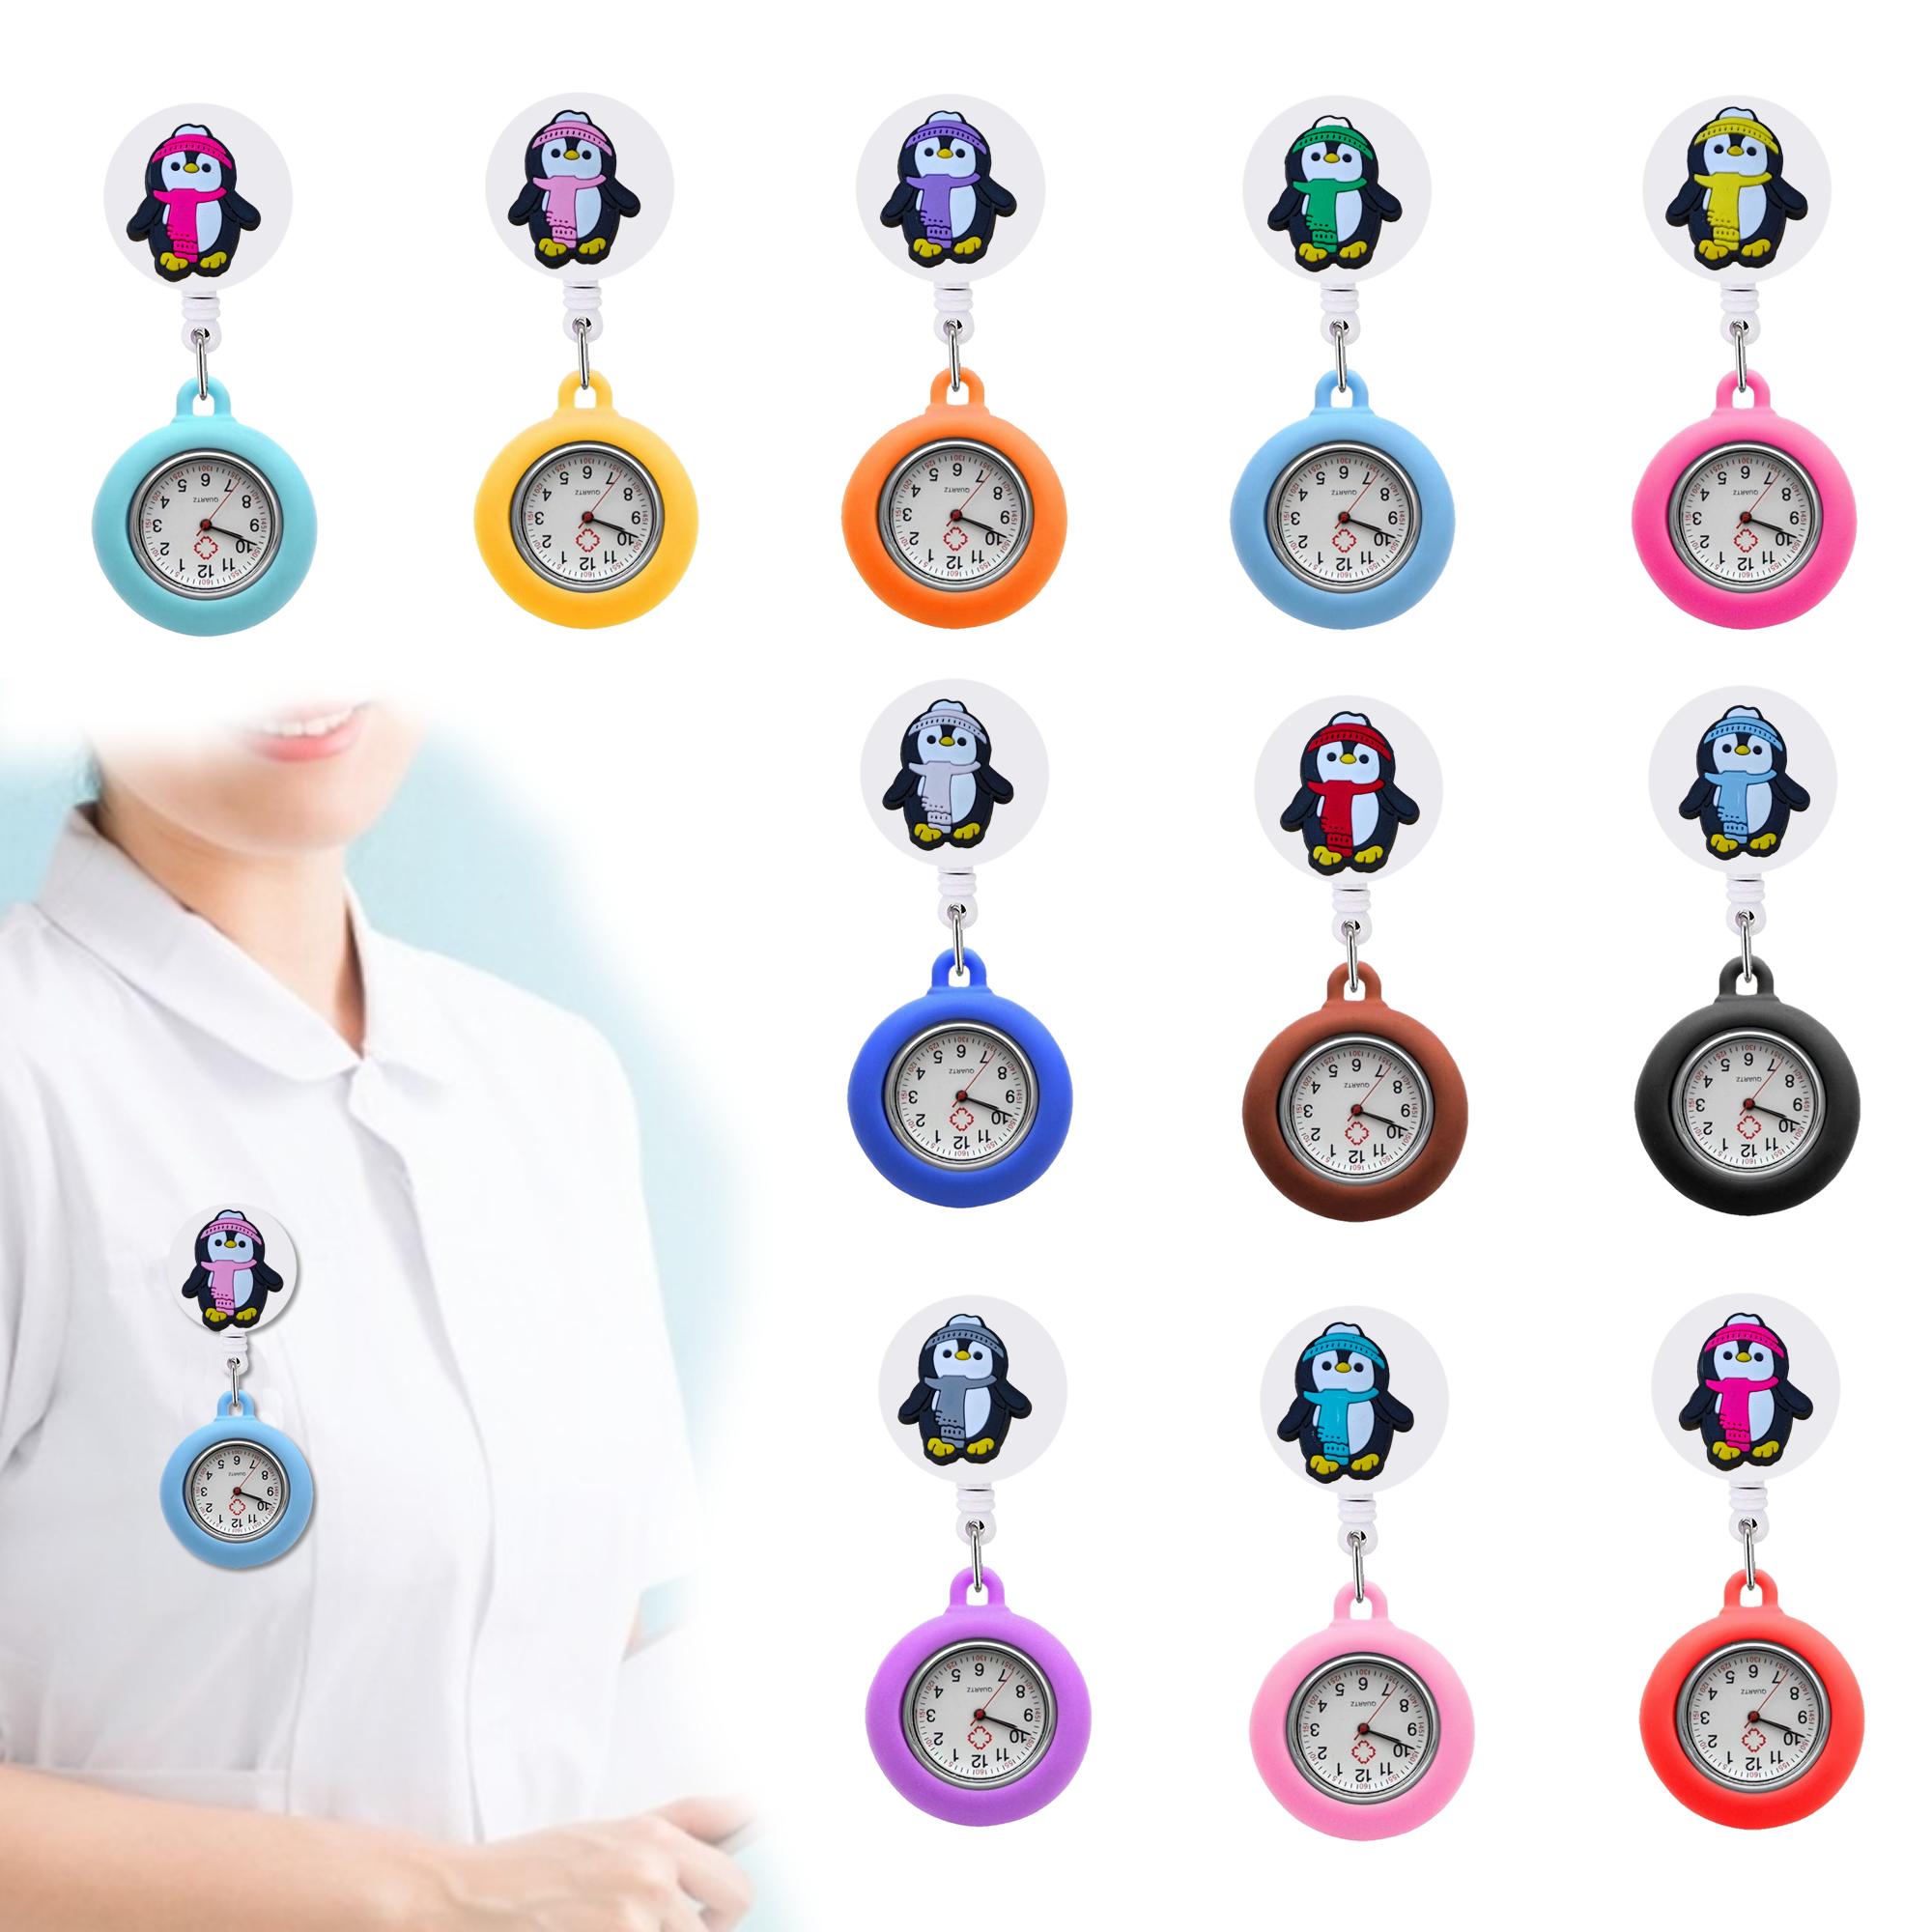 Other Fashion Accessories Penguin Clip Pocket Watches Womens Nurse On Watch For Nurses Doctors Sile Brooch Fob Medical Lapel Drop Deli Oth8P